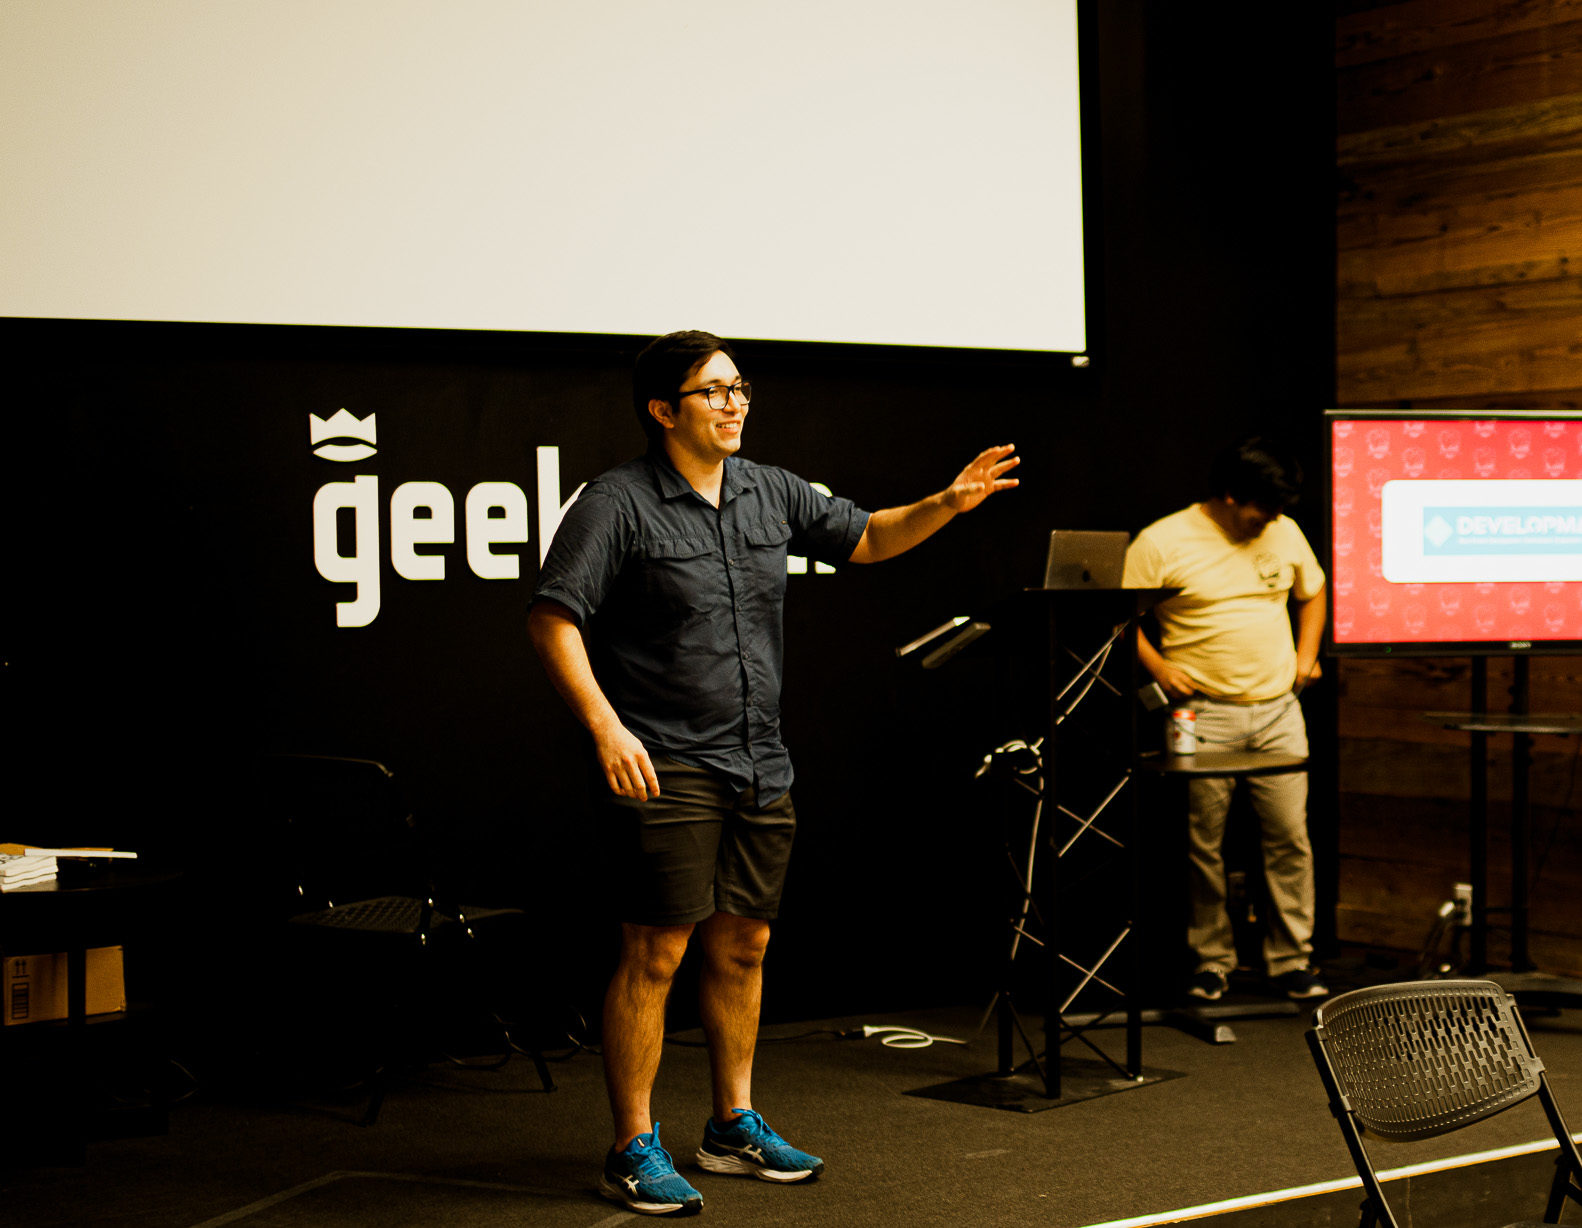 Christian Garcia works on his pitch at Geekdom, courtesy photo